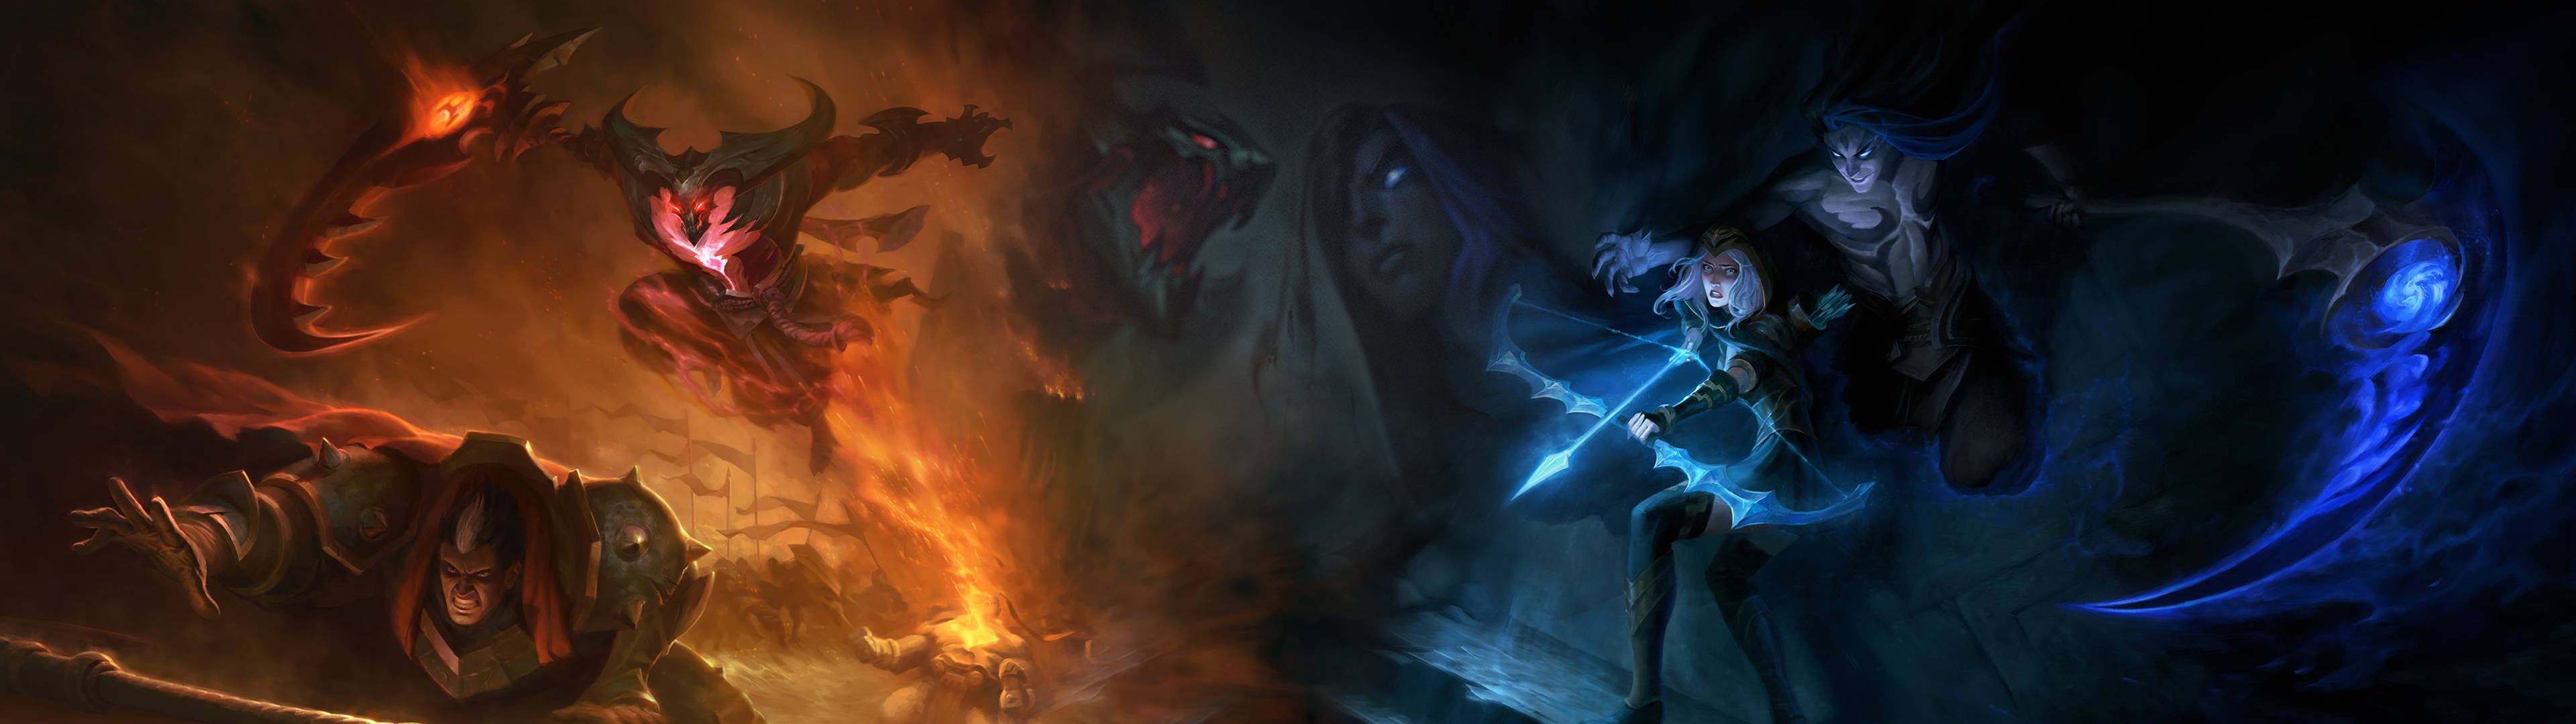 Unlock New Possibilities in the World of League of Legends Wallpaper